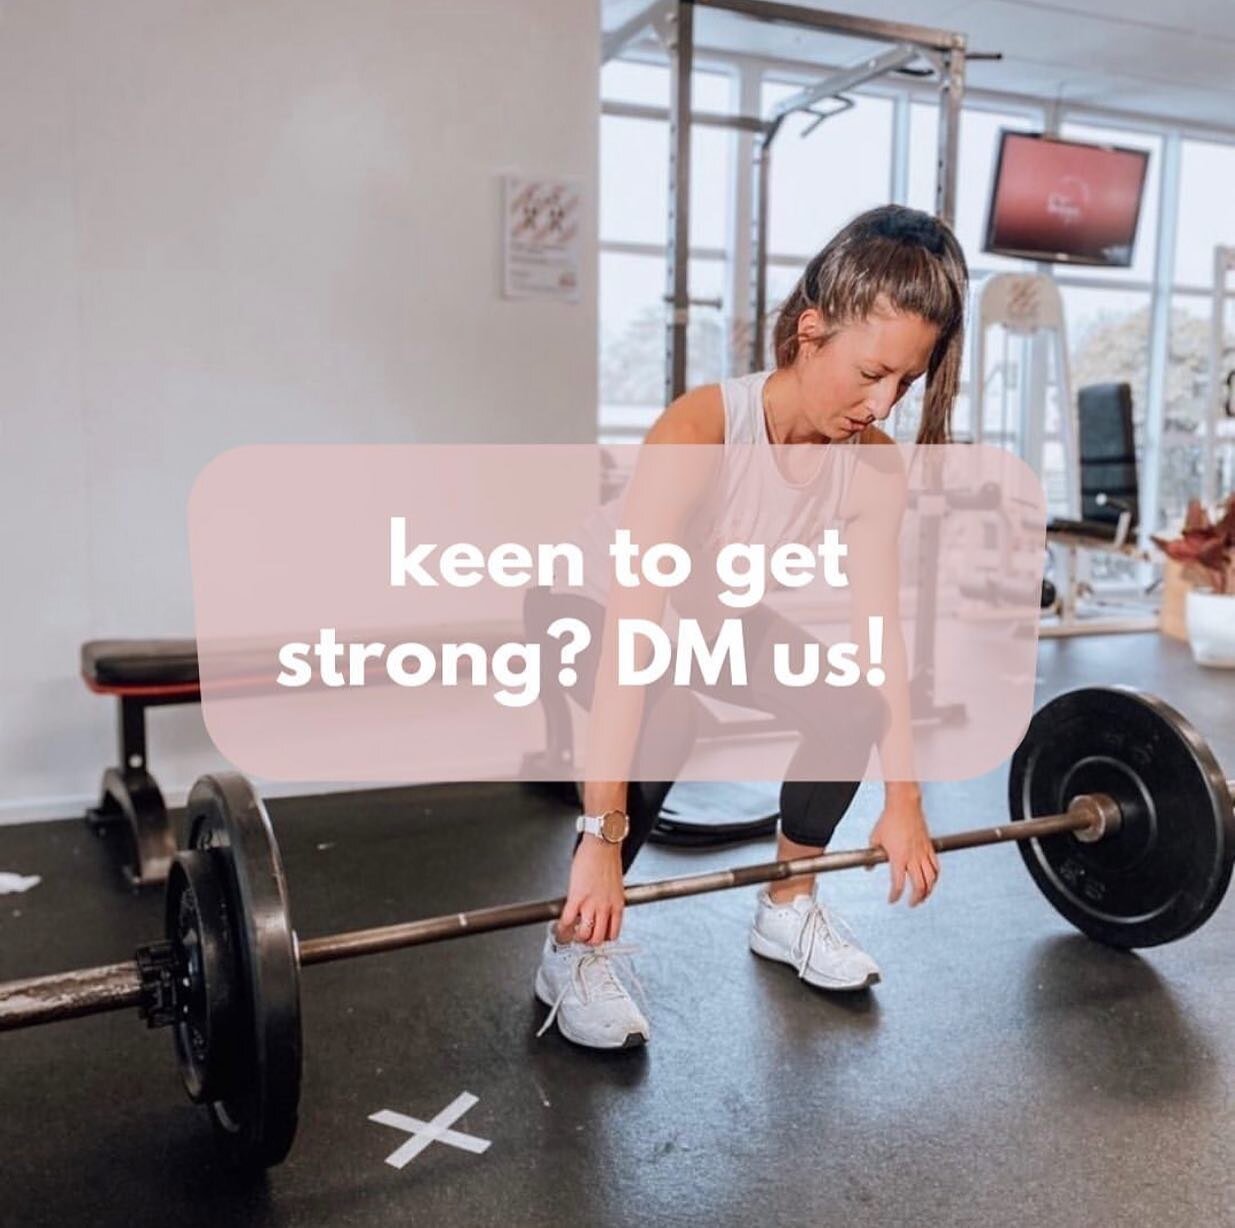 At The Boutique Training Room we celebrate:

💪 building strength and FEELING your best
💕 nourishing a SUPPORTIVE community
🏅 understanding that achievements come in the form of CONSISTENCY and BALANCE
🙋&zwj;♀️ helping you become your FAVOURITE ve